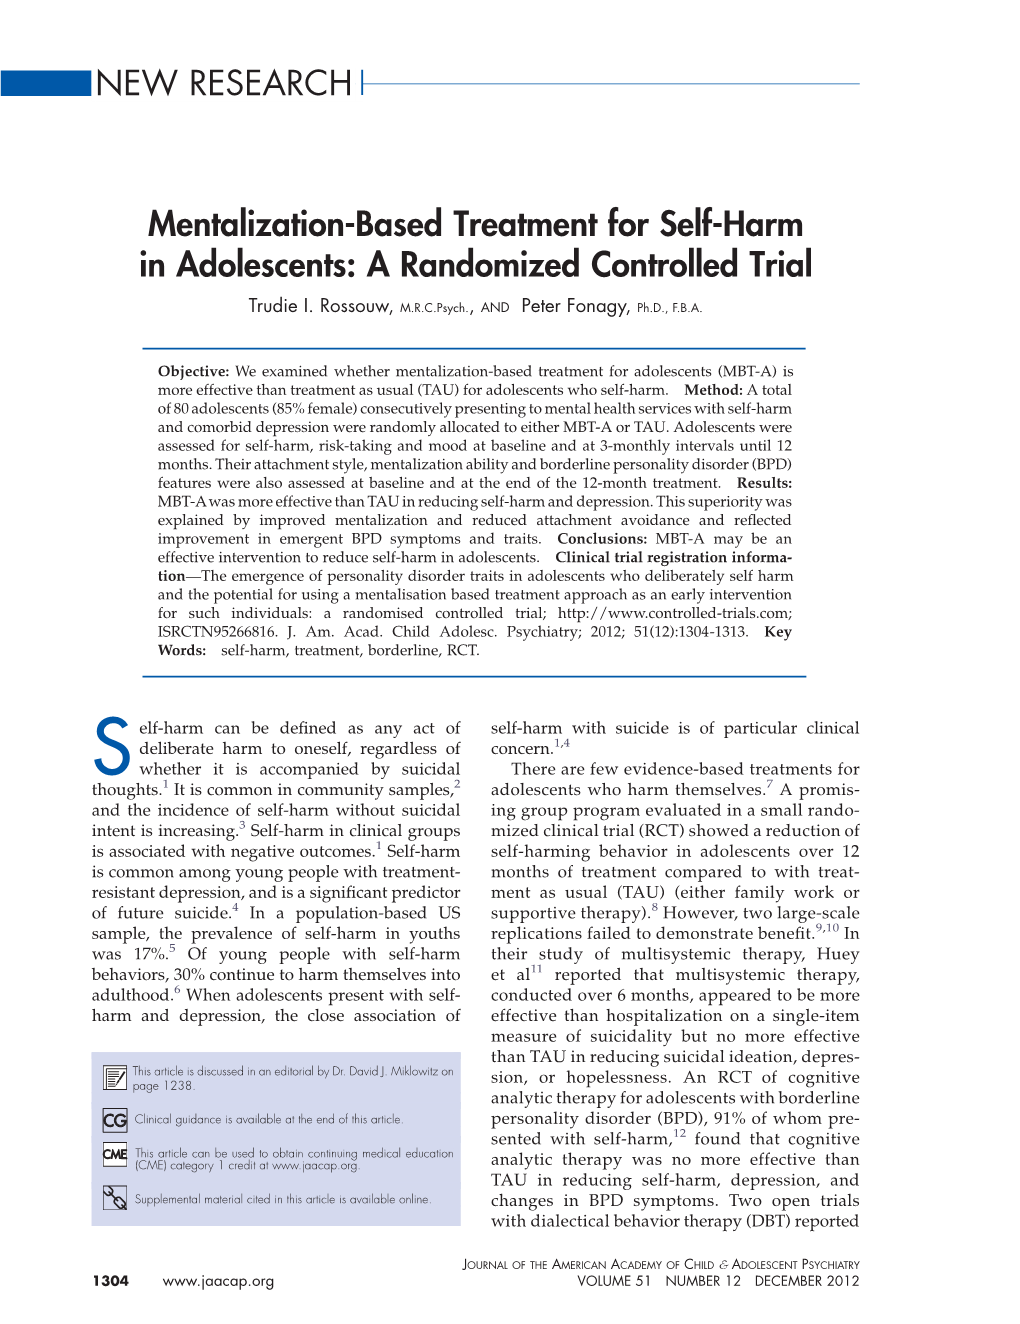 Mentalization-Based Treatment for Self-Harm in Adolescents: a Randomized Controlled Trial